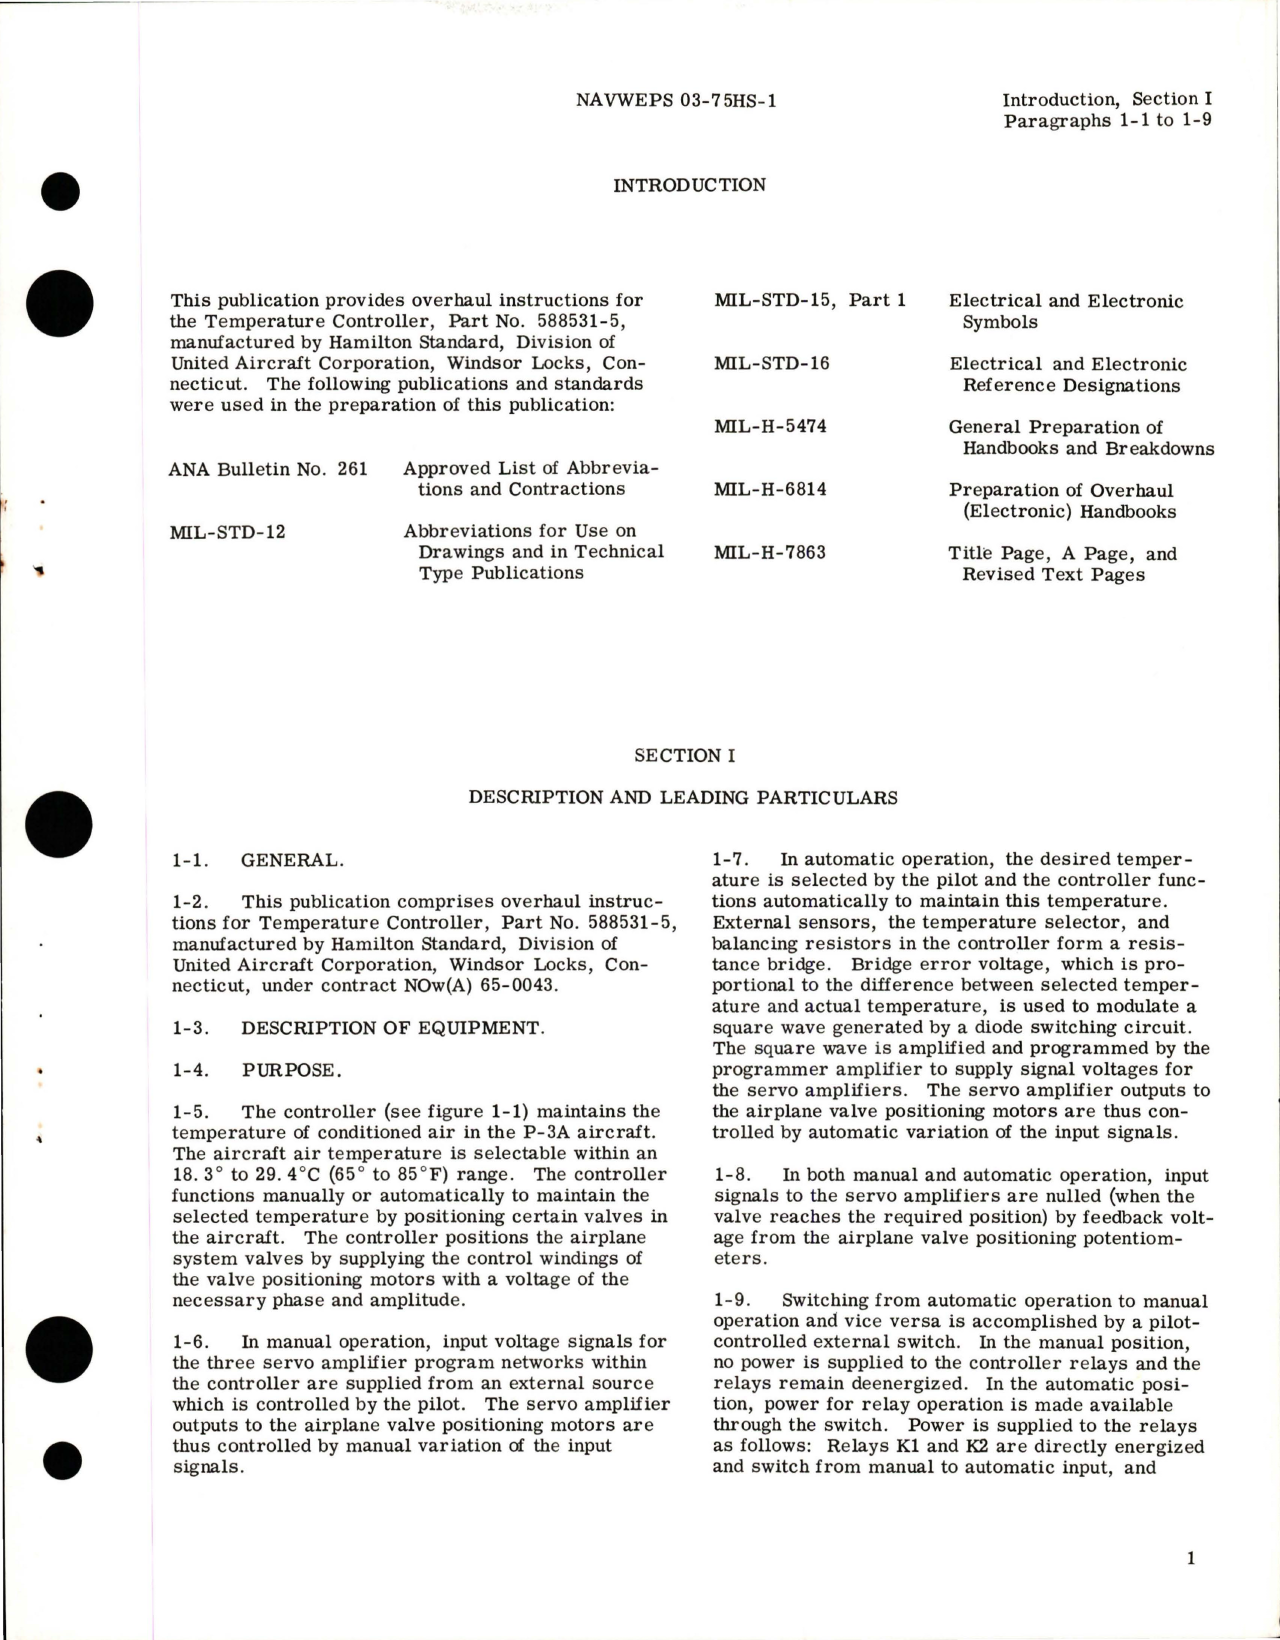 Sample page 5 from AirCorps Library document: Overhaul Instructions for Temperature Controller - Parts 588531-3 and 588531-5